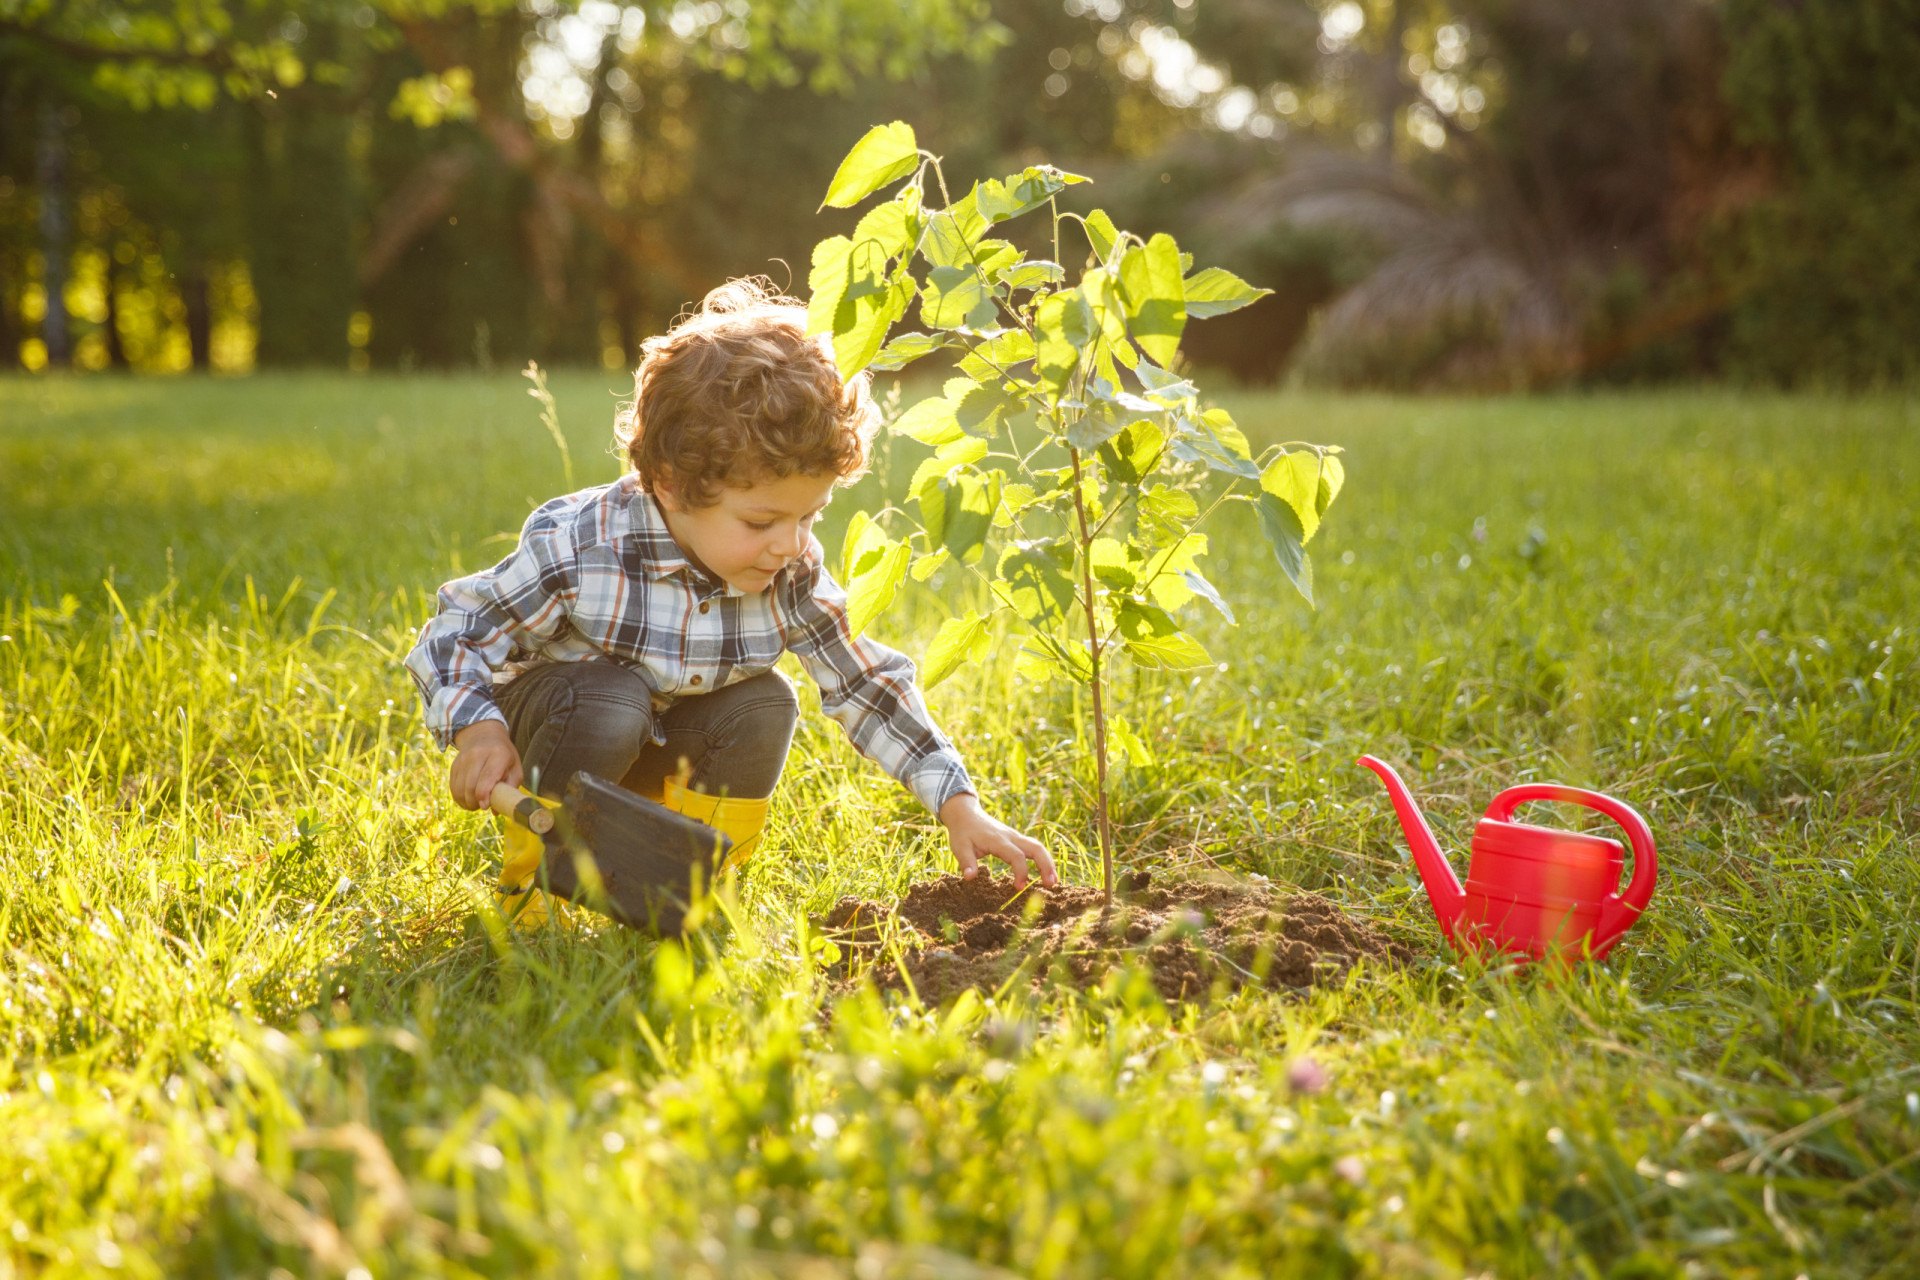 <p>Educating children about environmental responsibility is a vital part of good manners. It instills a sense of stewardship for the planet we all share.</p><p>You may also like:<a href="https://www.starsinsider.com/n/267781?utm_source=msn.com&utm_medium=display&utm_campaign=referral_description&utm_content=588009en-en"> All the times the British royal family turned up in unexpected places</a></p>